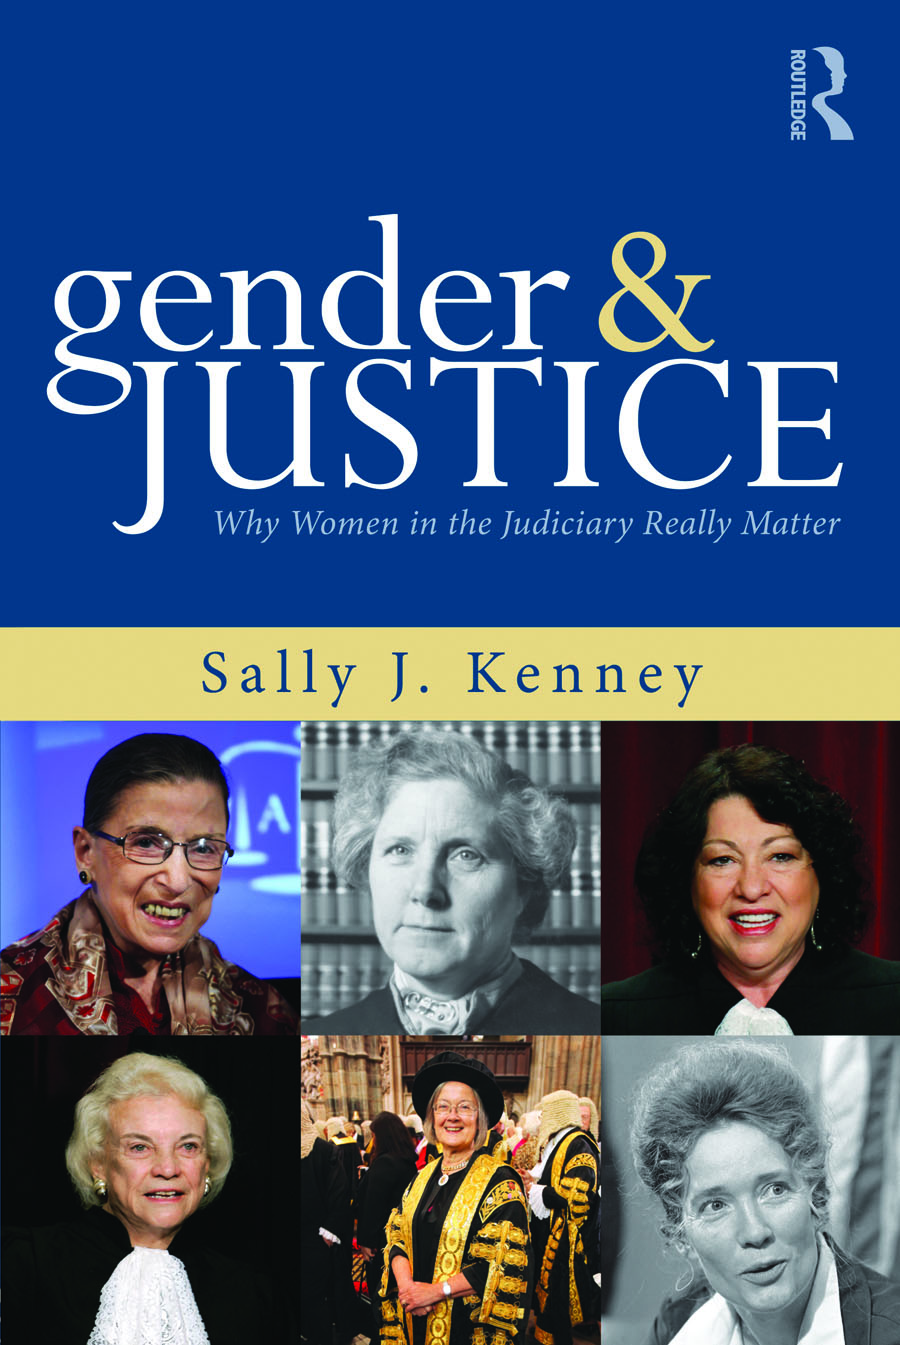 "Gender & Justice" by Sally J. Kenney